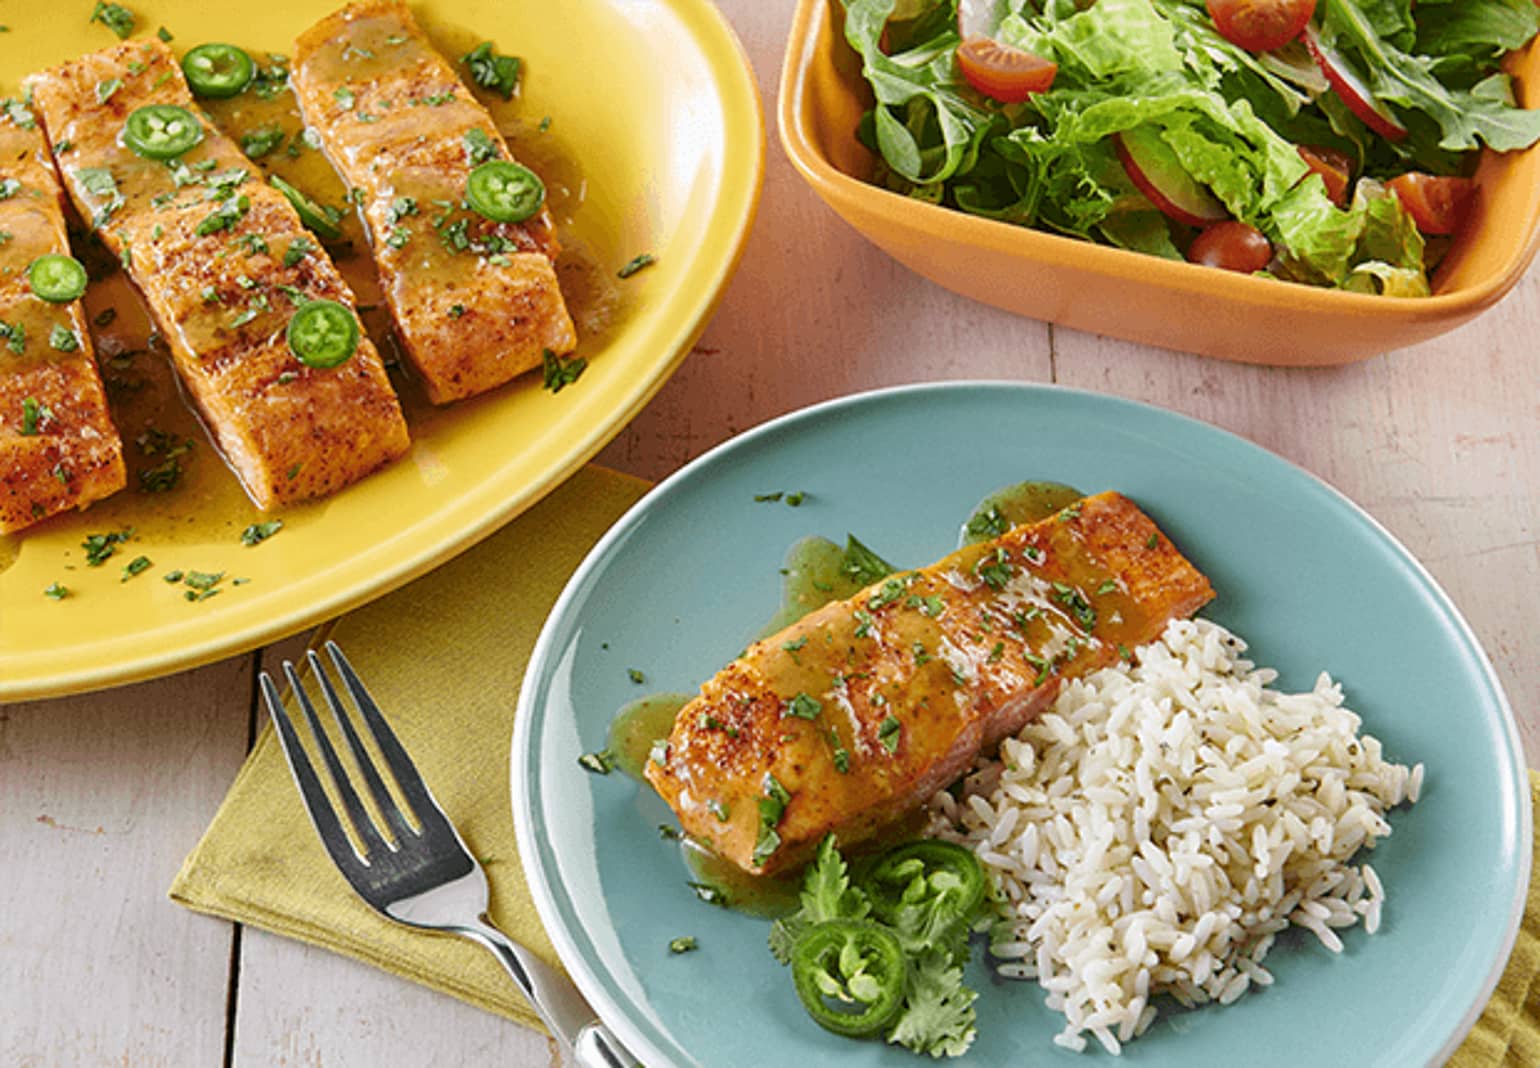 Baked Chili Lime Salmon with Verde Sauce